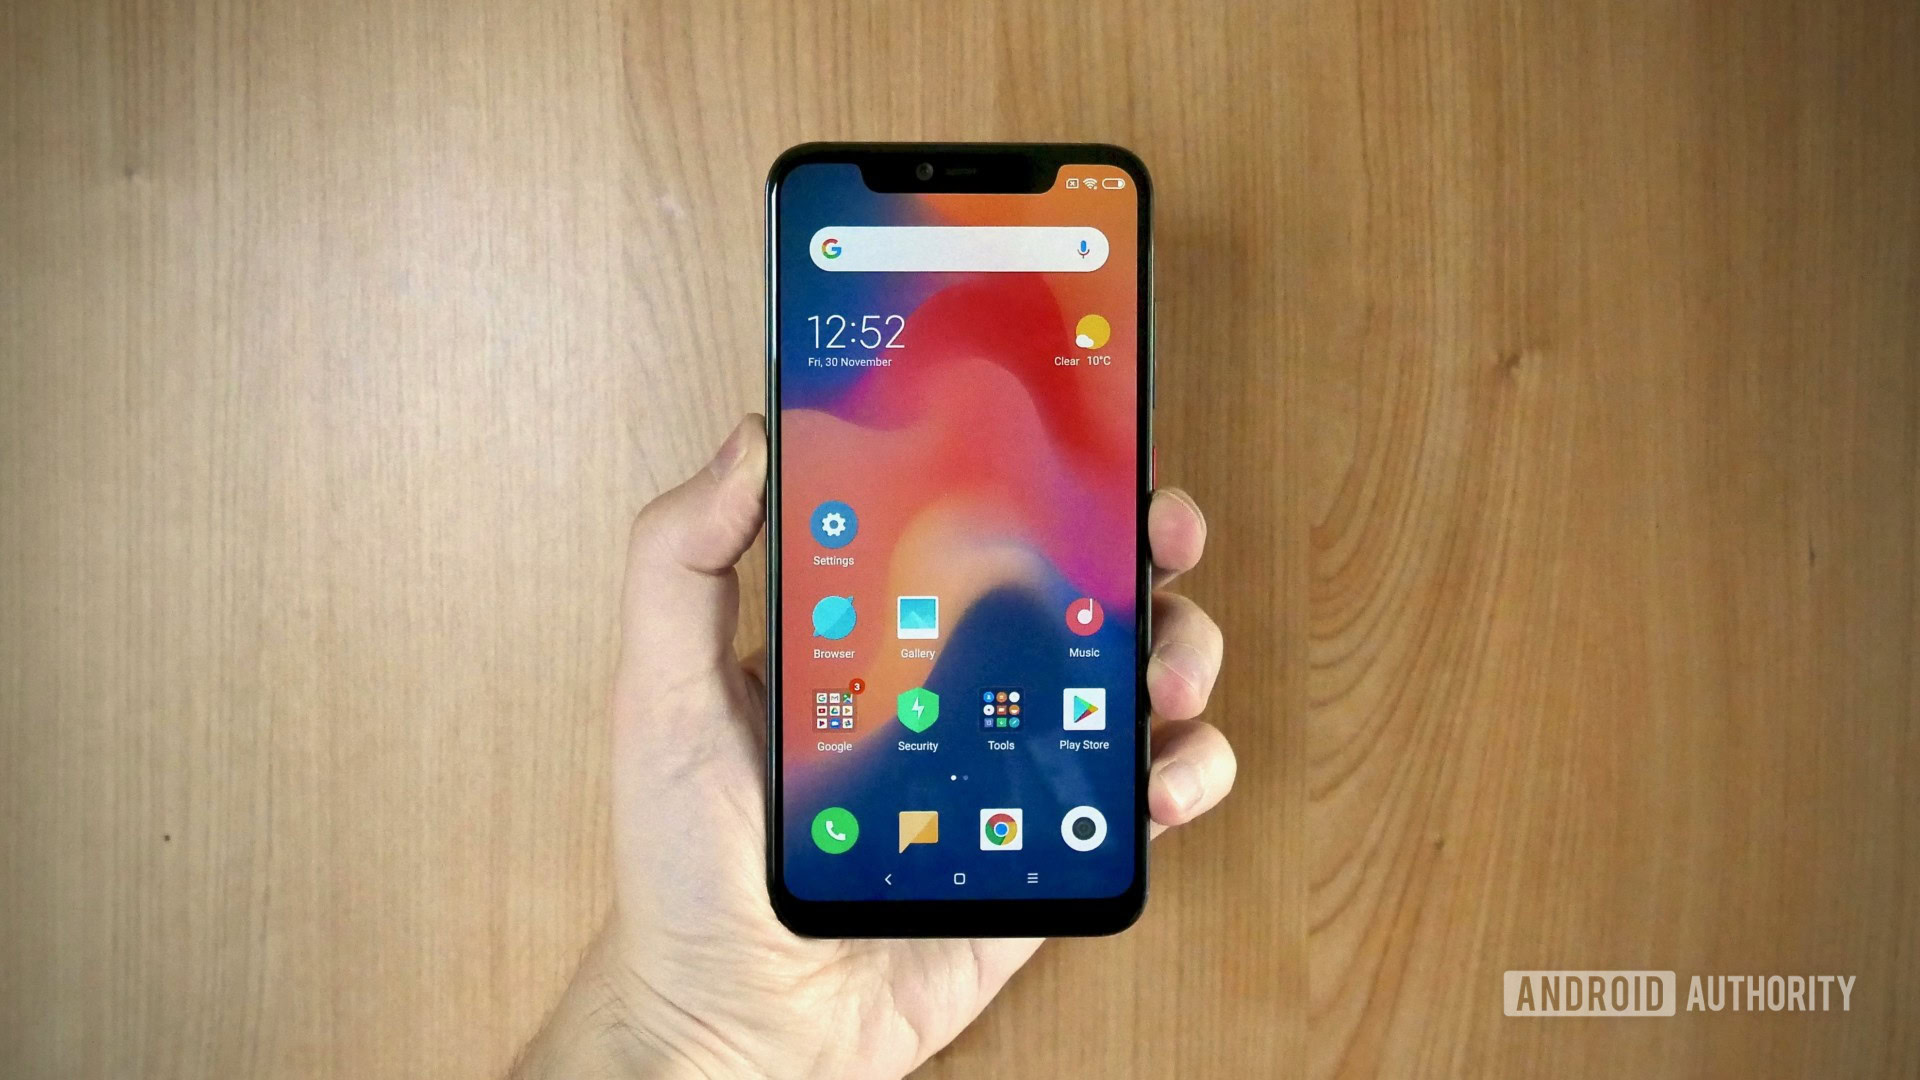 Redmi Note 8 Pro: Hits the right note even if it doesn't tower over rival